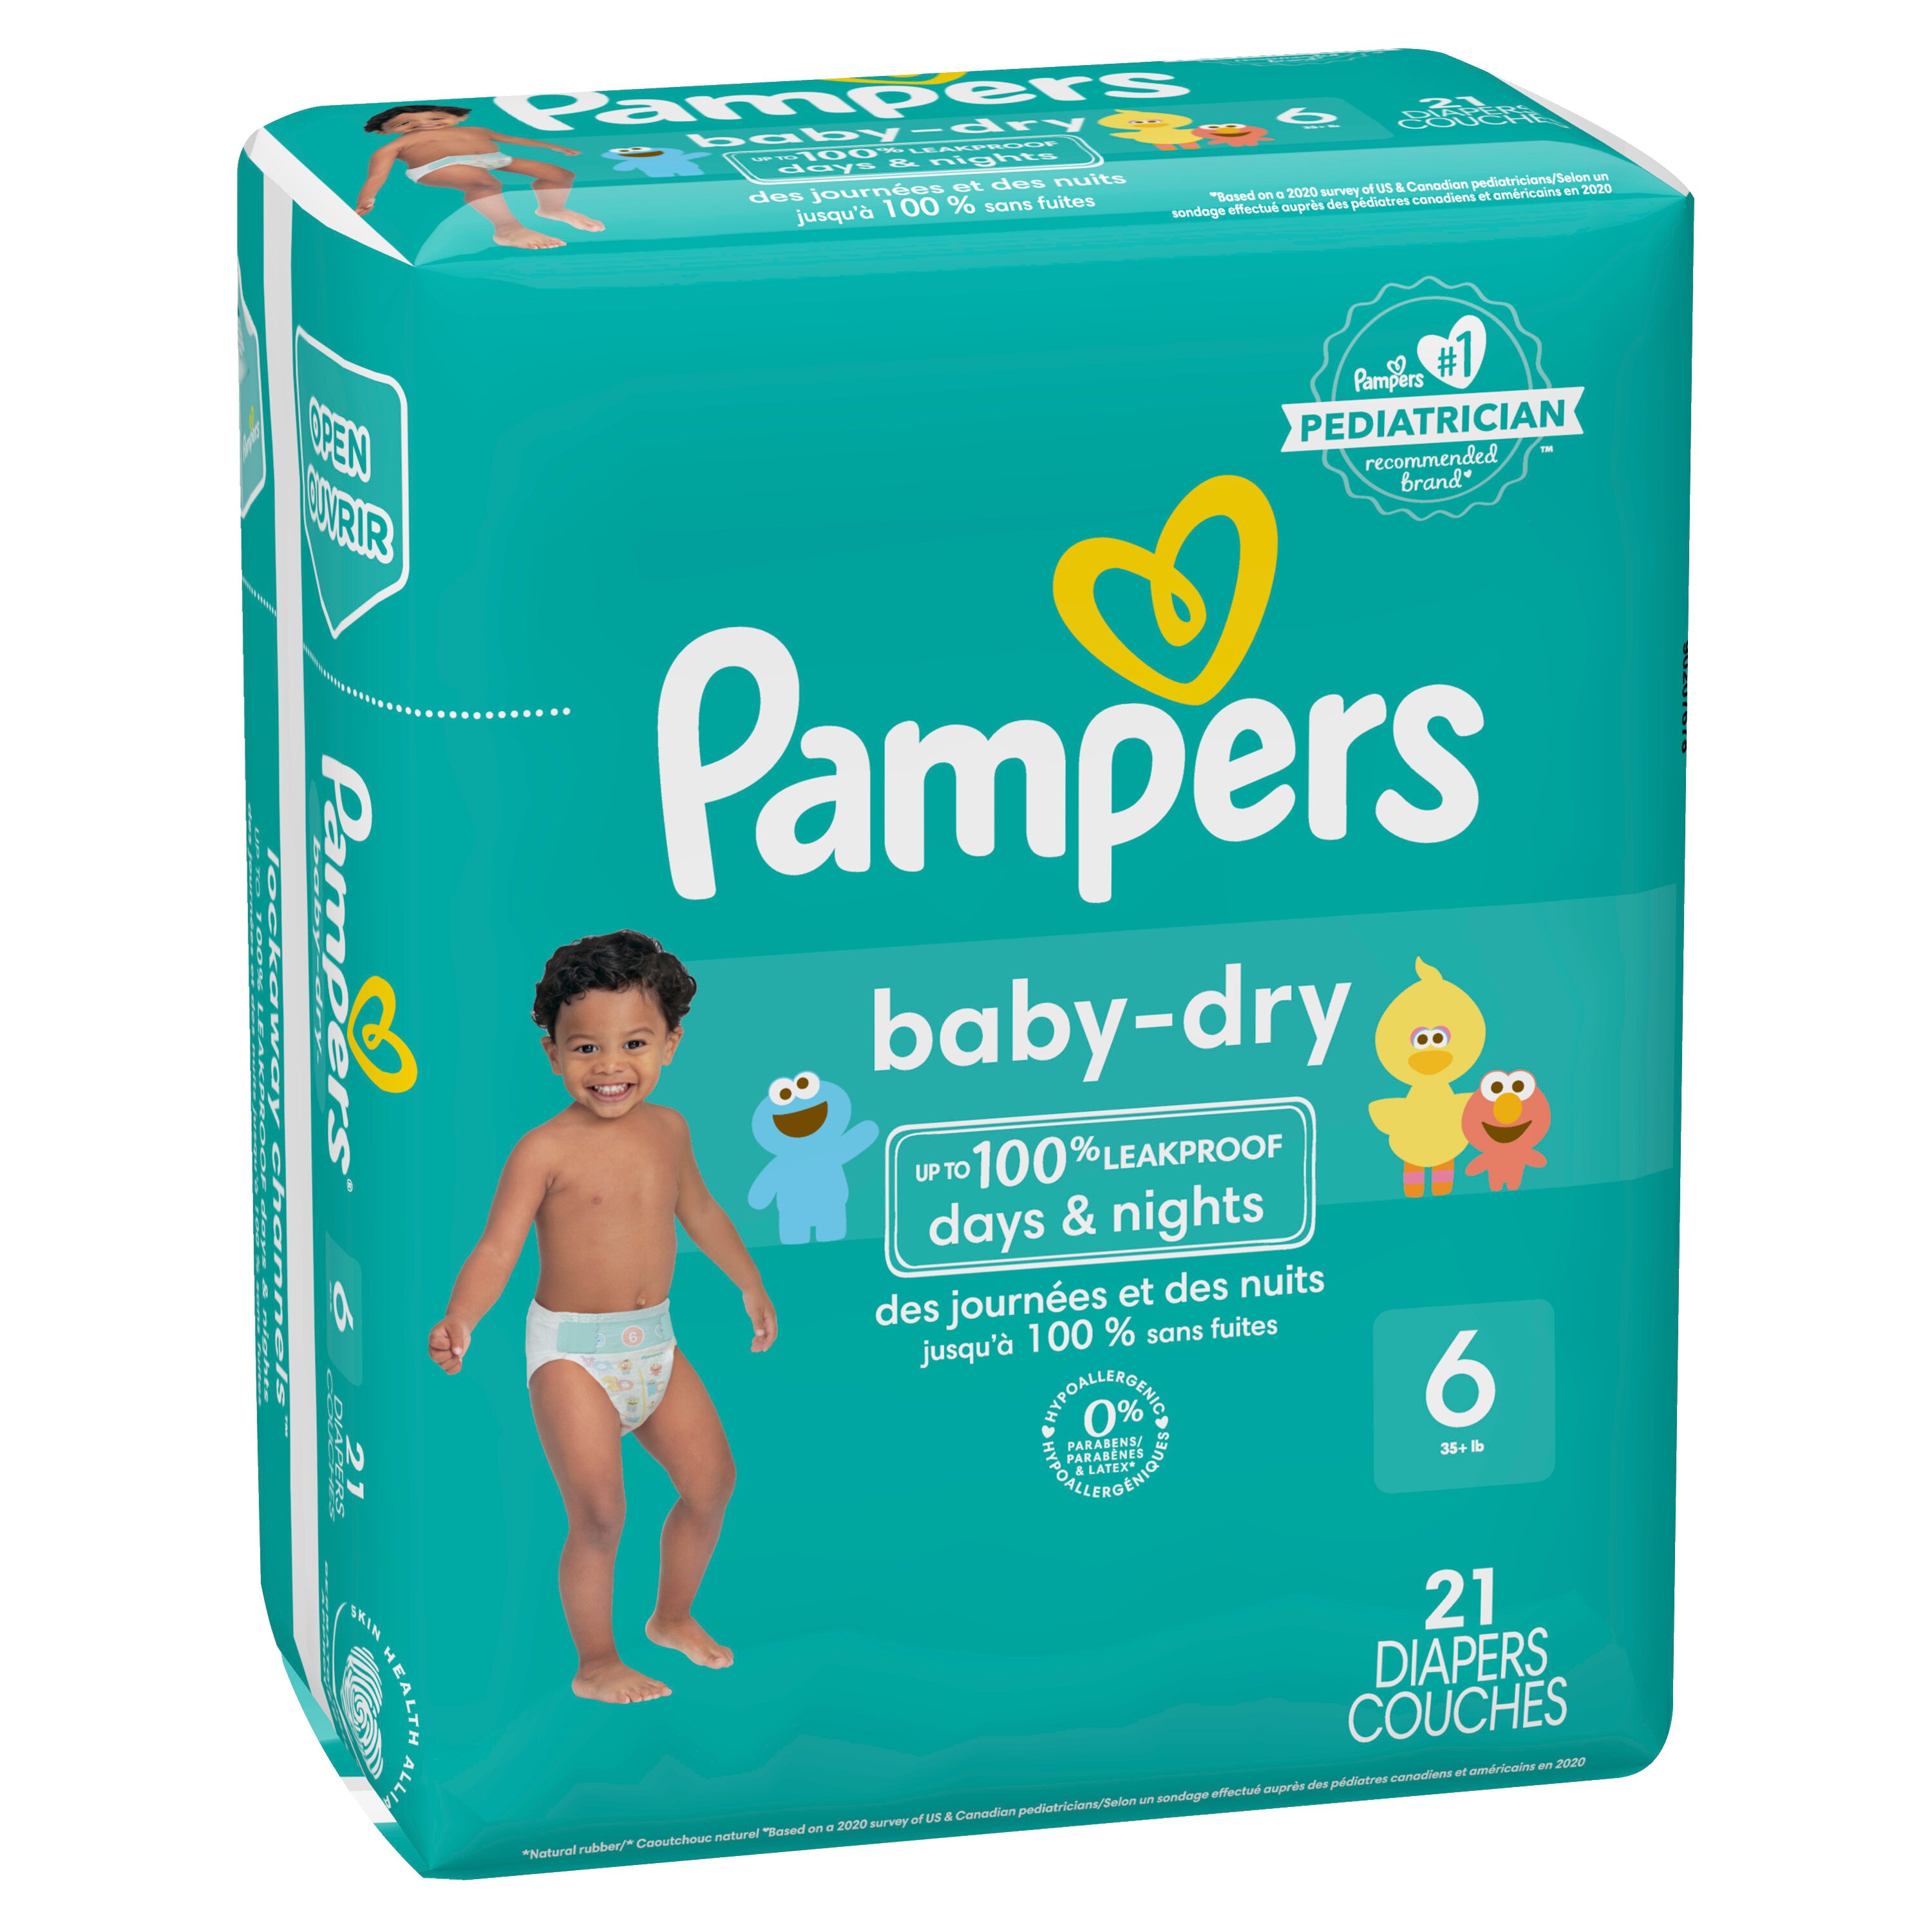 weefgetouw kaart kader Pampers Baby Dry Pack Diapers | Pick Up In Store TODAY at CVS